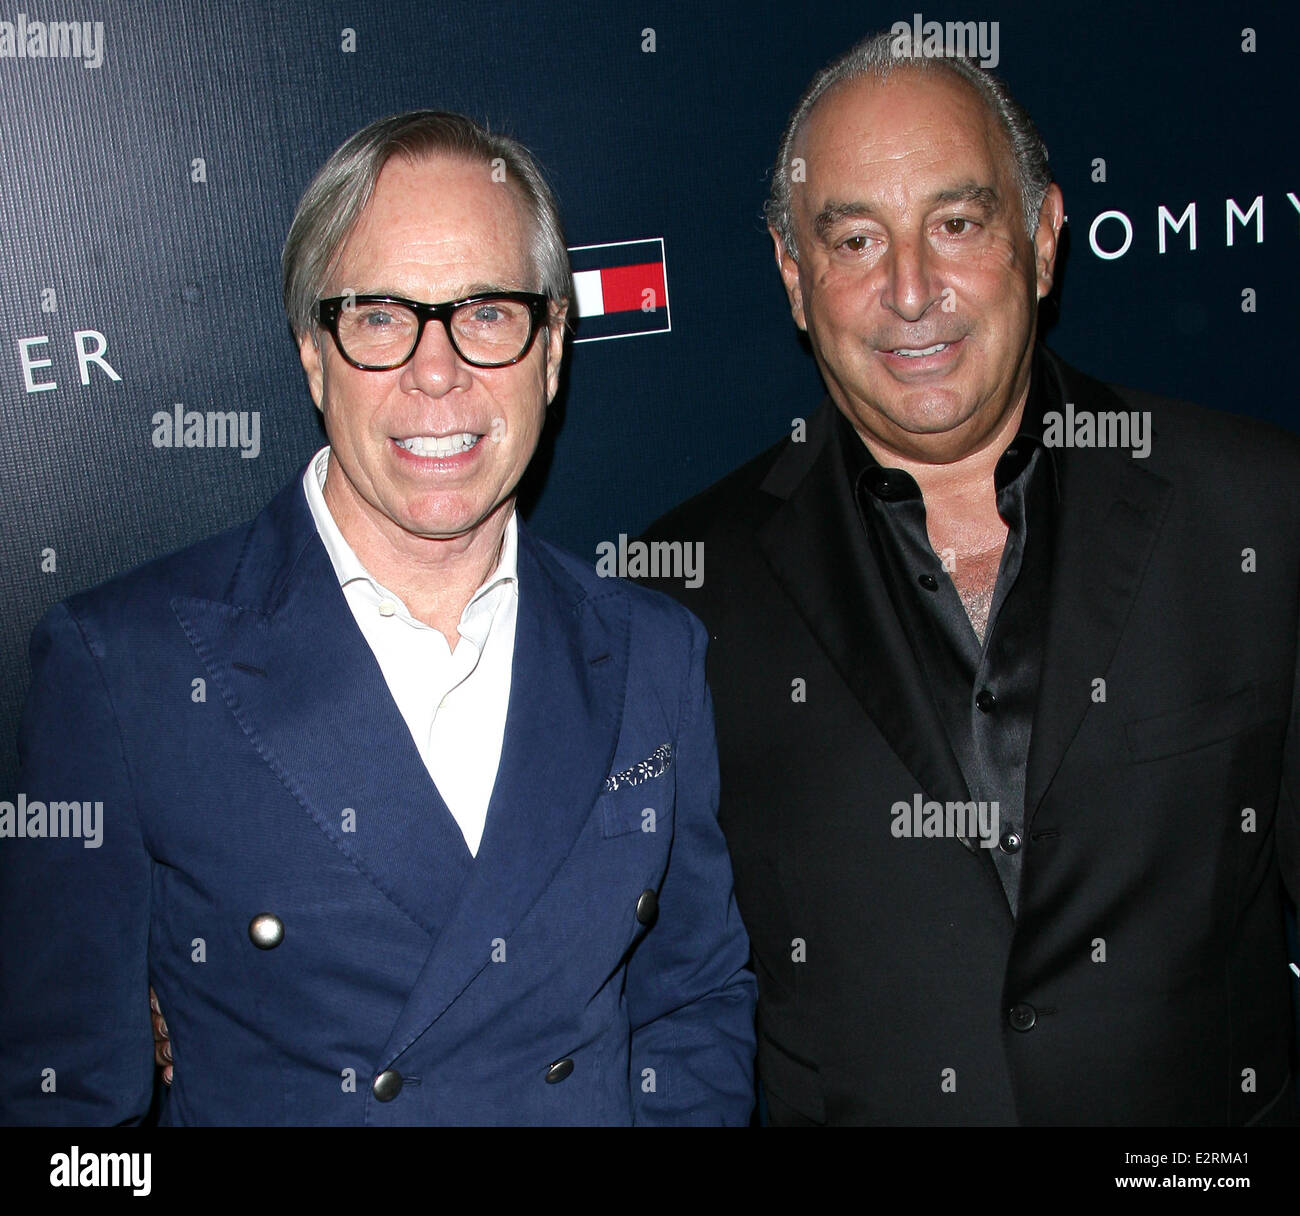 Tommy Hilfiger And Sir Philip Green High Resolution Stock Photography and  Images - Alamy